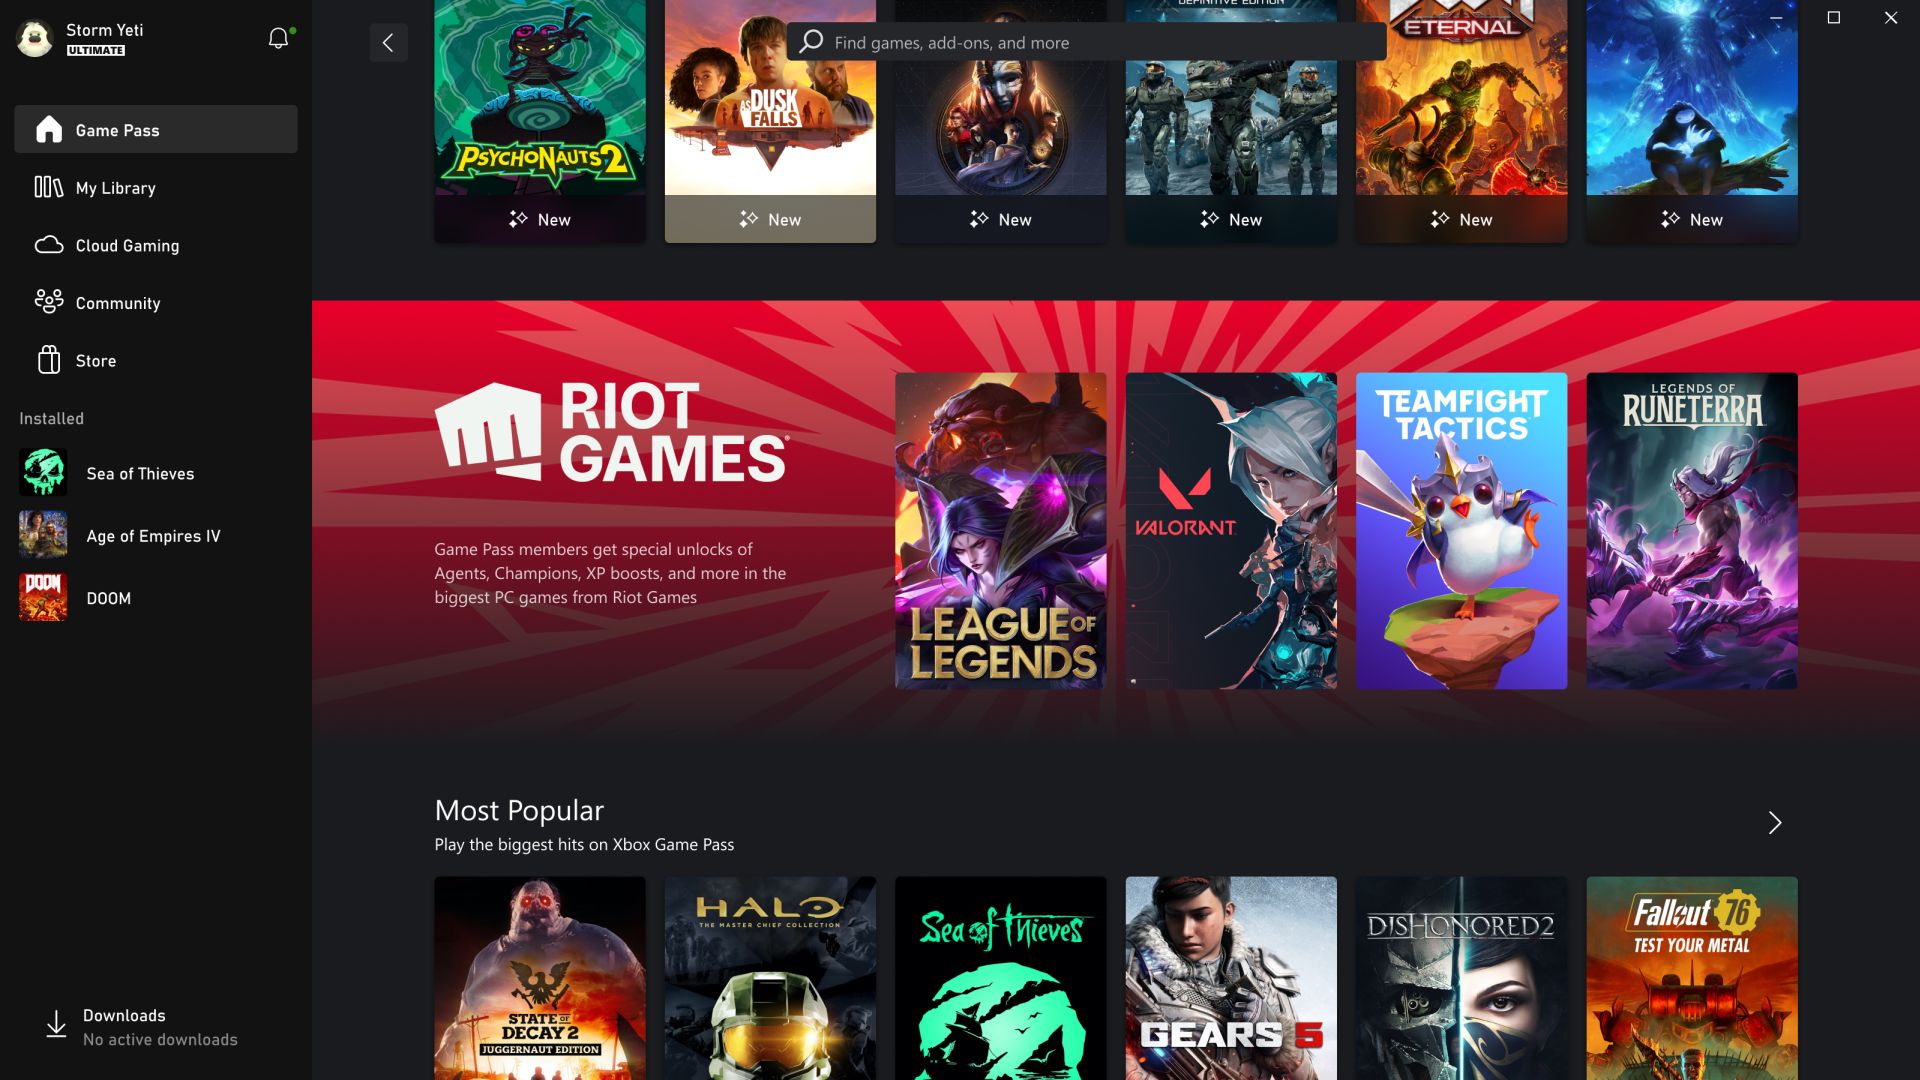 Riot Games Now Available with Xbox Game Pass Ultimate